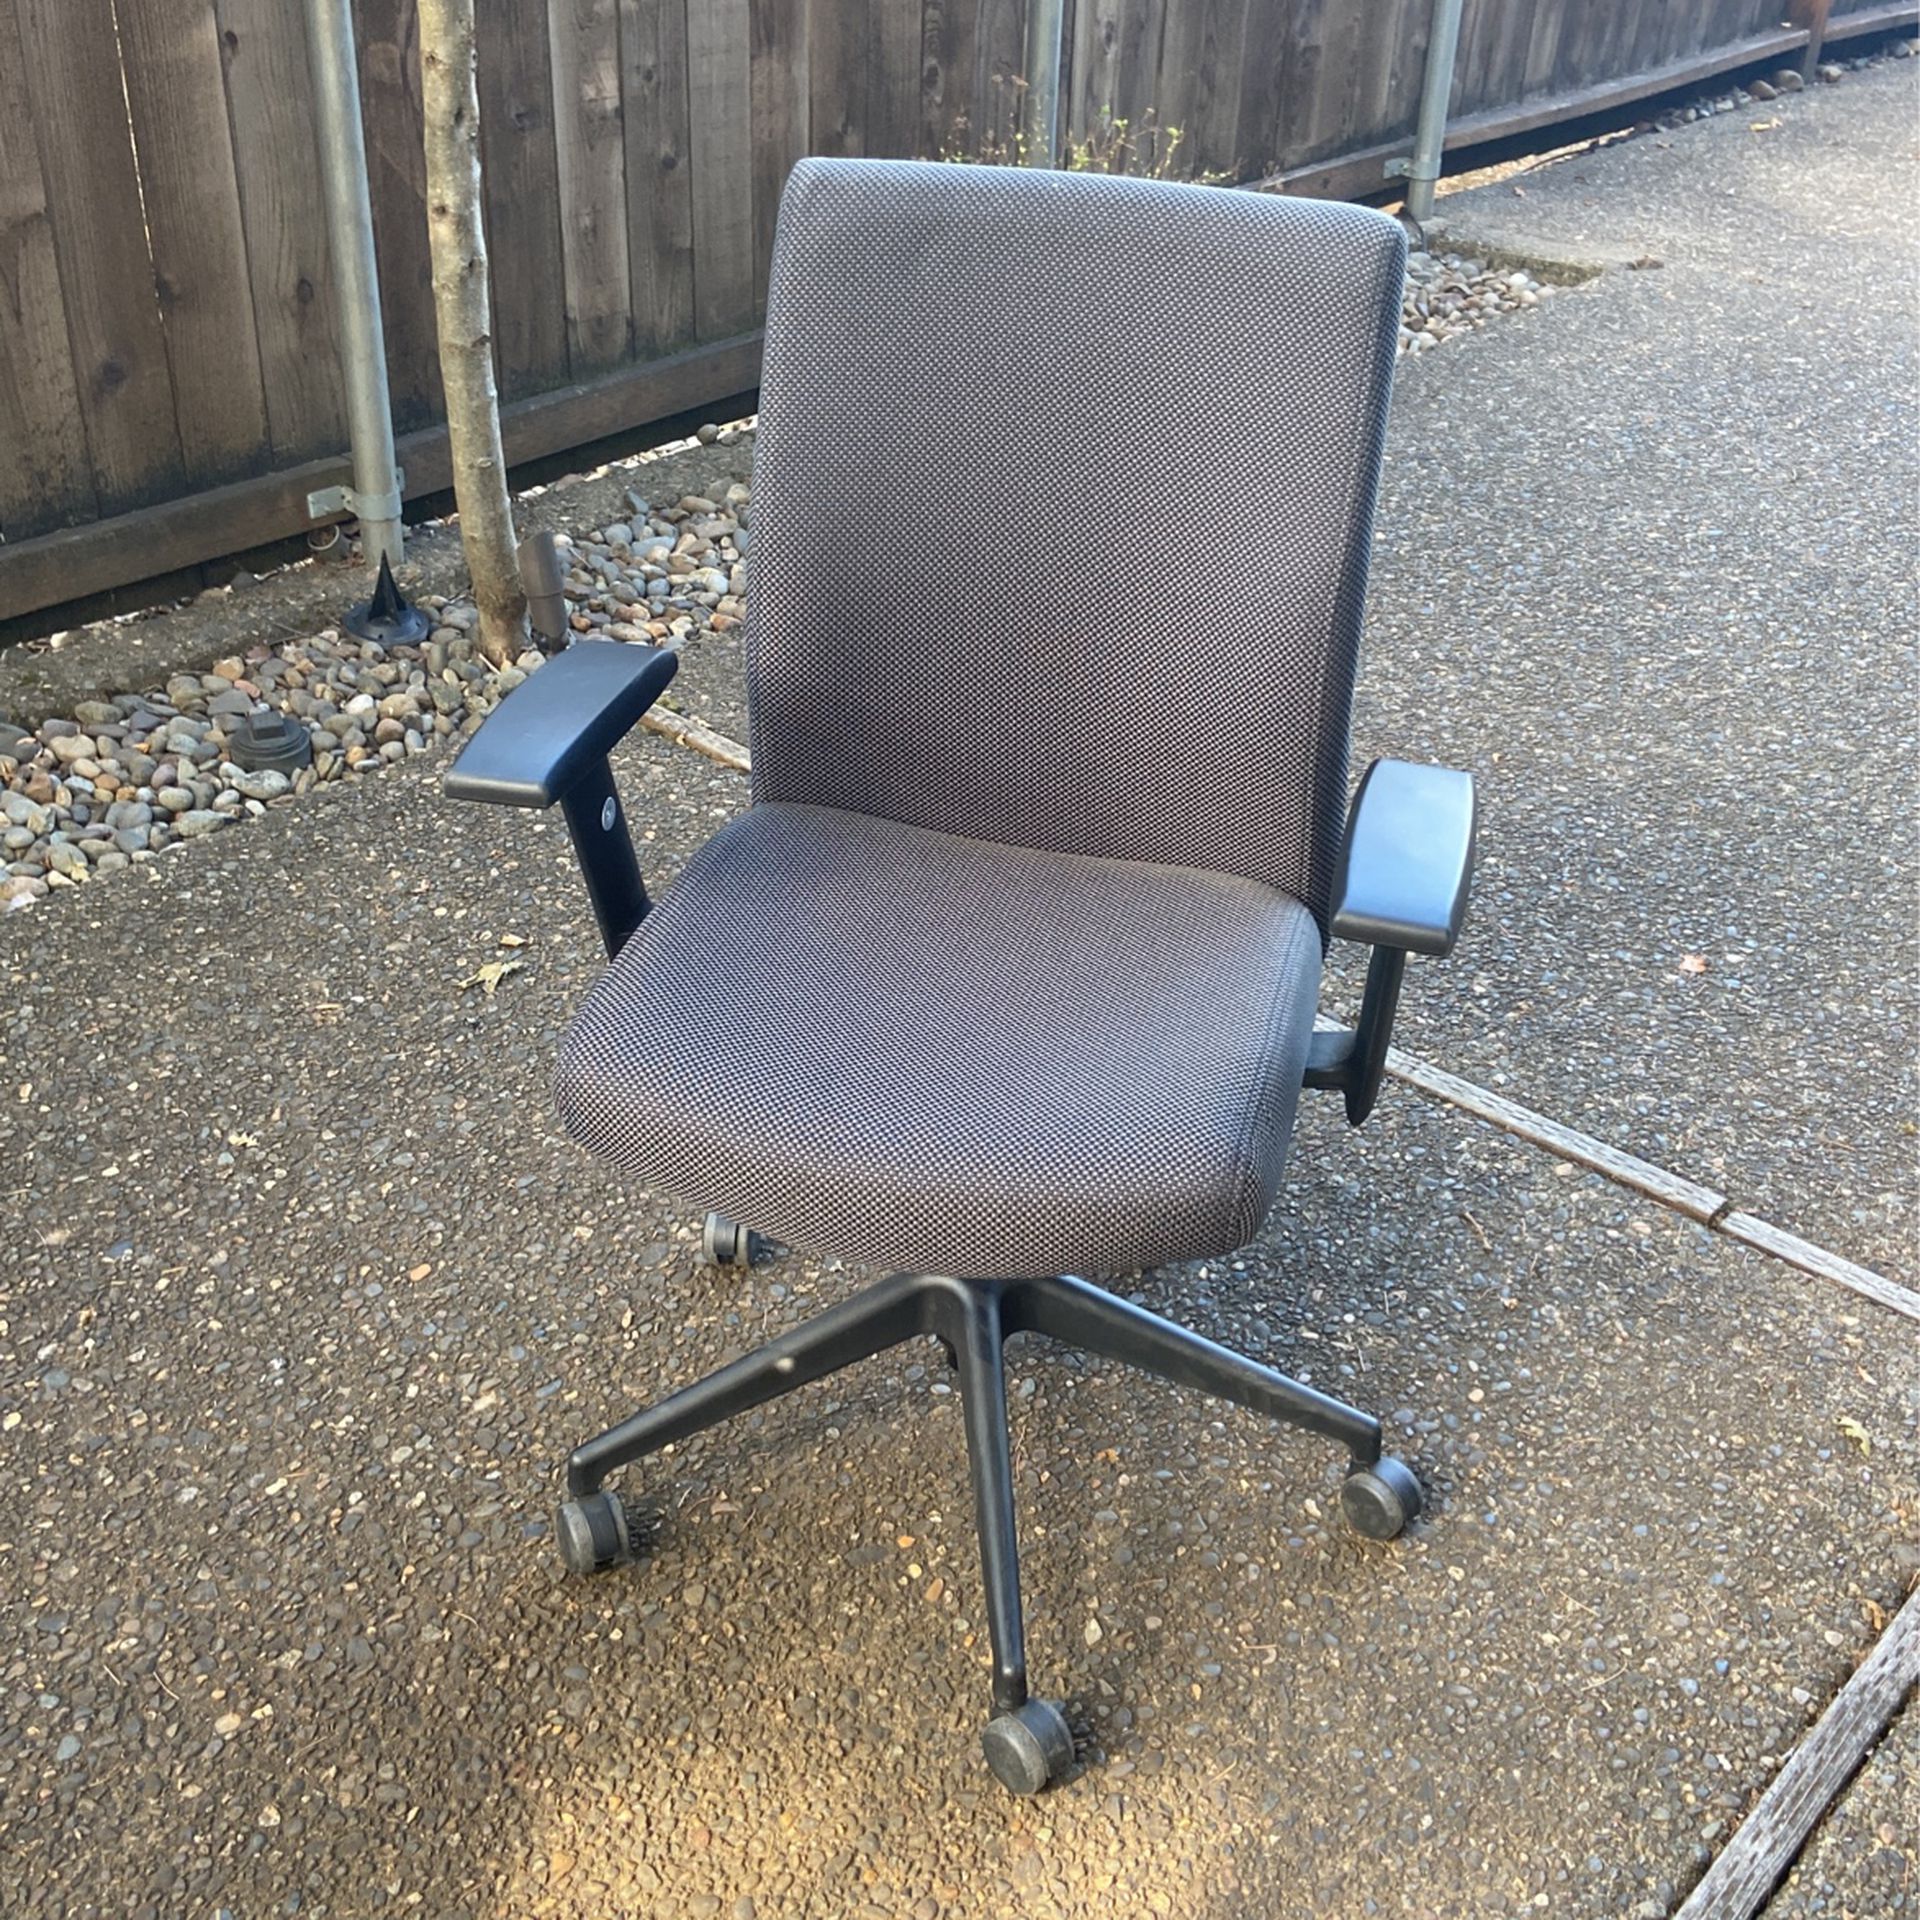 Black Cushioned Rolling Office Chair